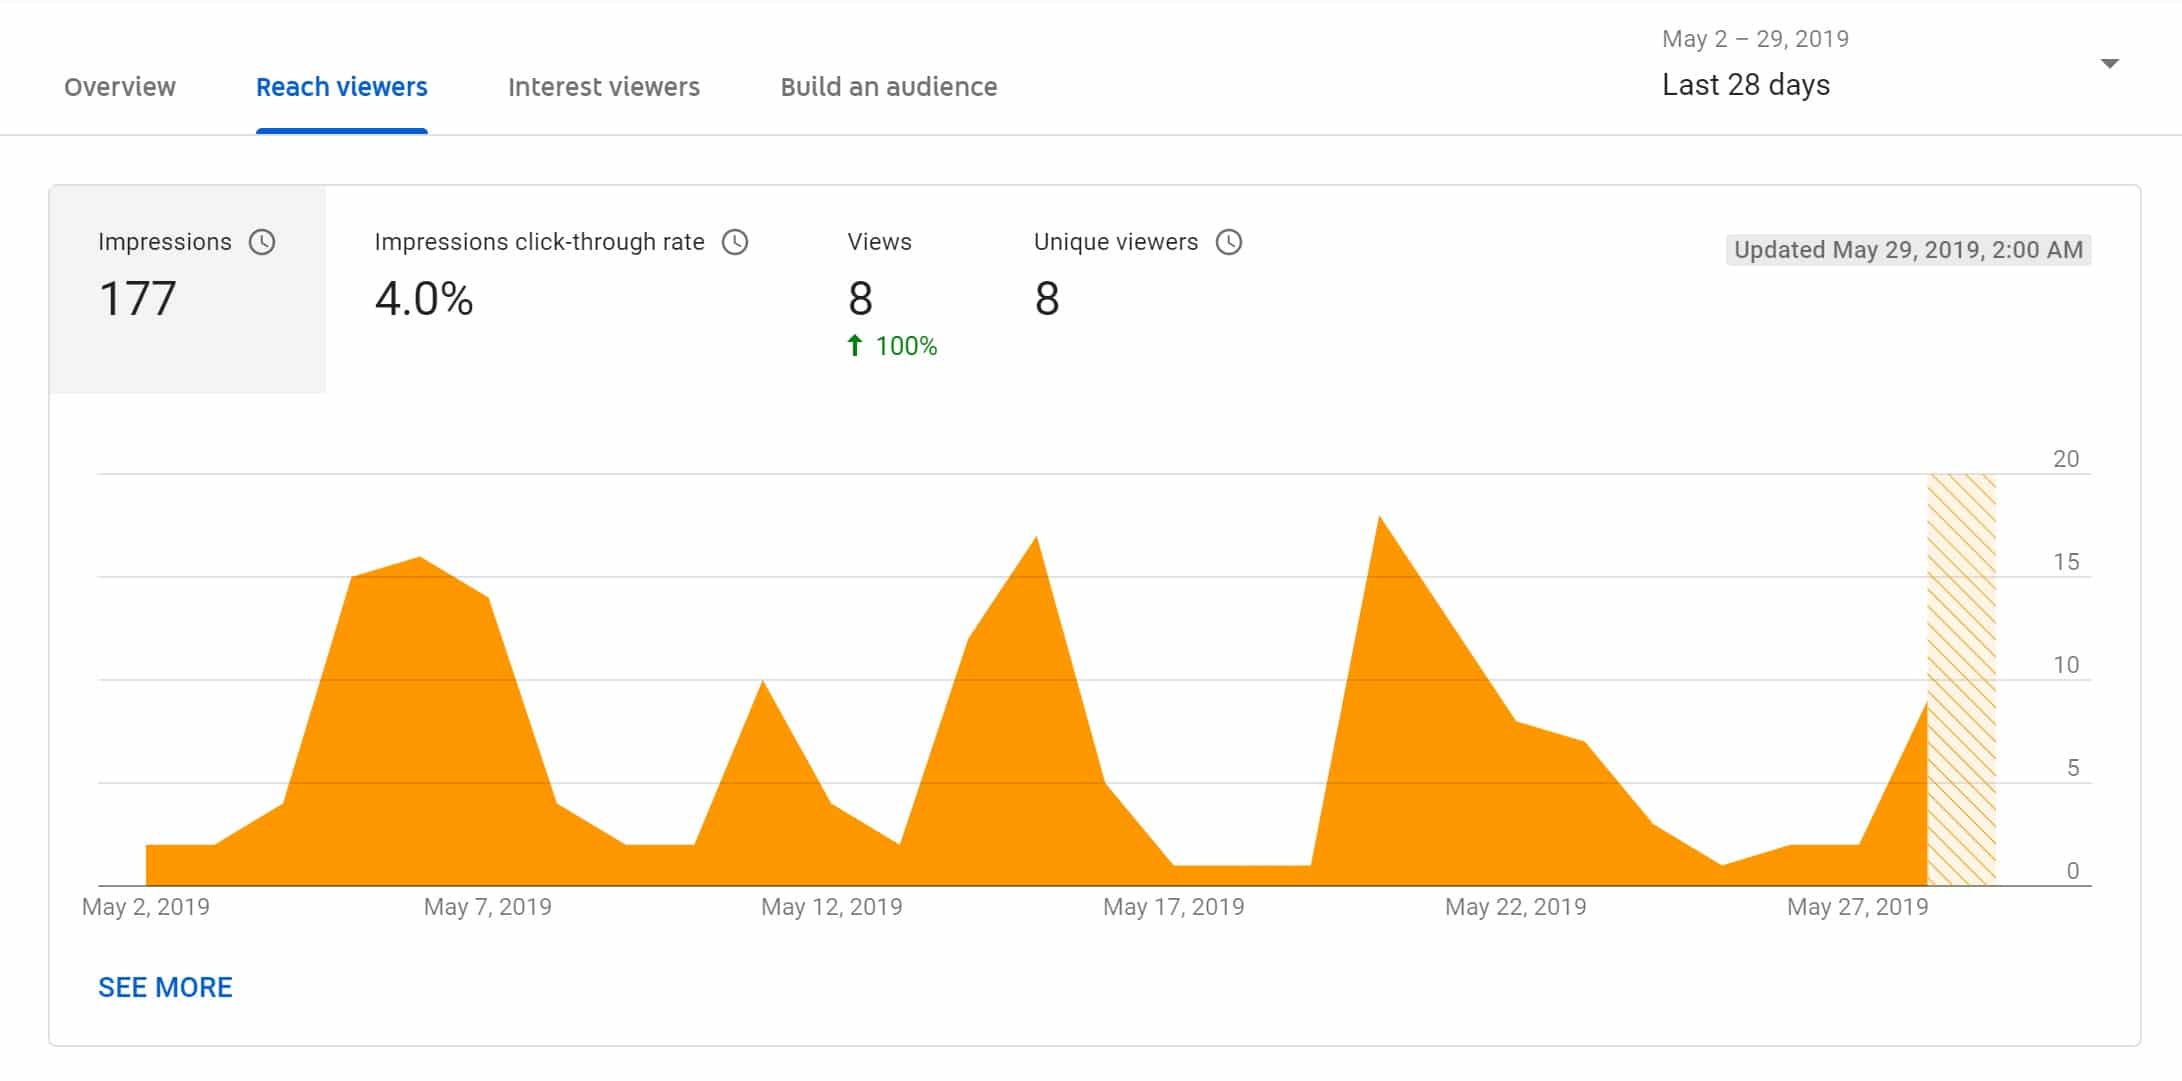 YouTube offers marketing teams the option to view a variety of different key performance indicators (KPIs) through their YouTube Studio